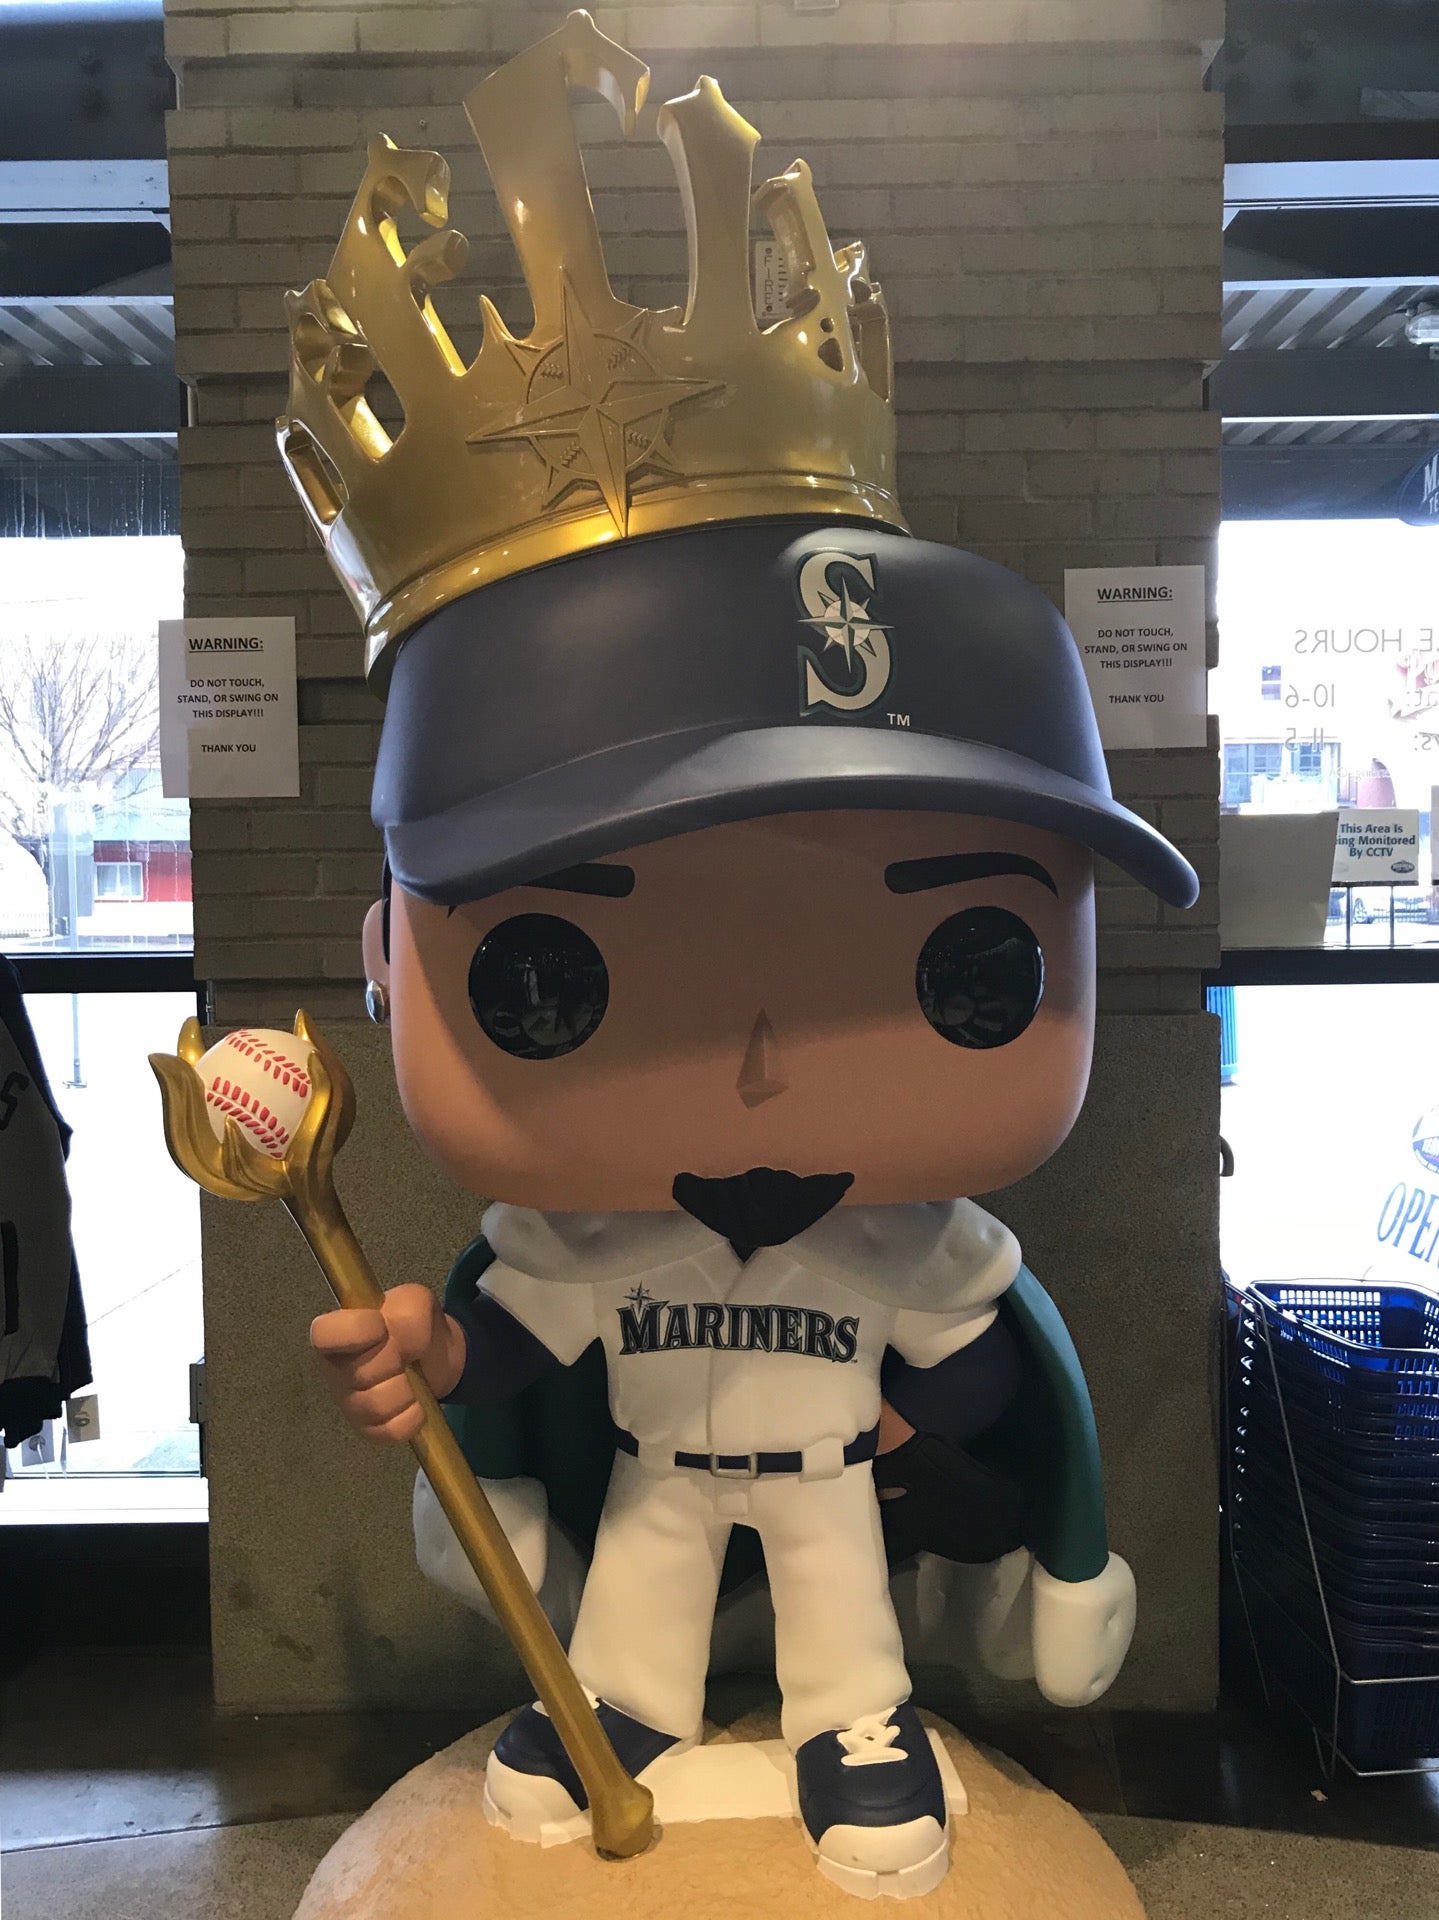 Photos at Mariners Team Store - 1250 1st Ave S